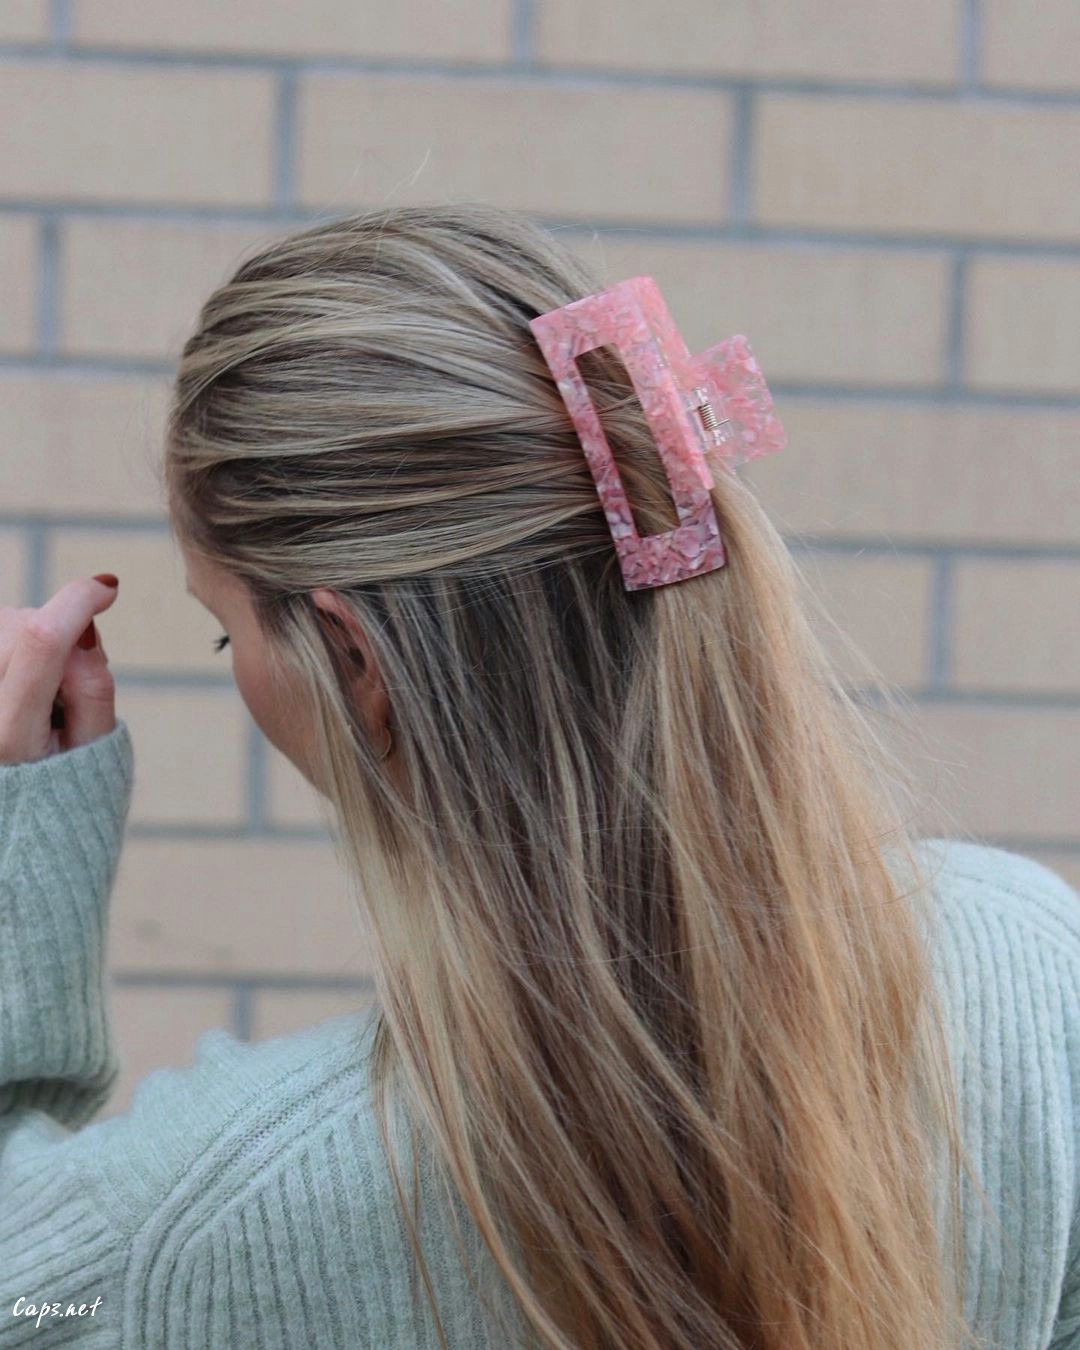 Light Blonde Hair With Pink Claw Clip